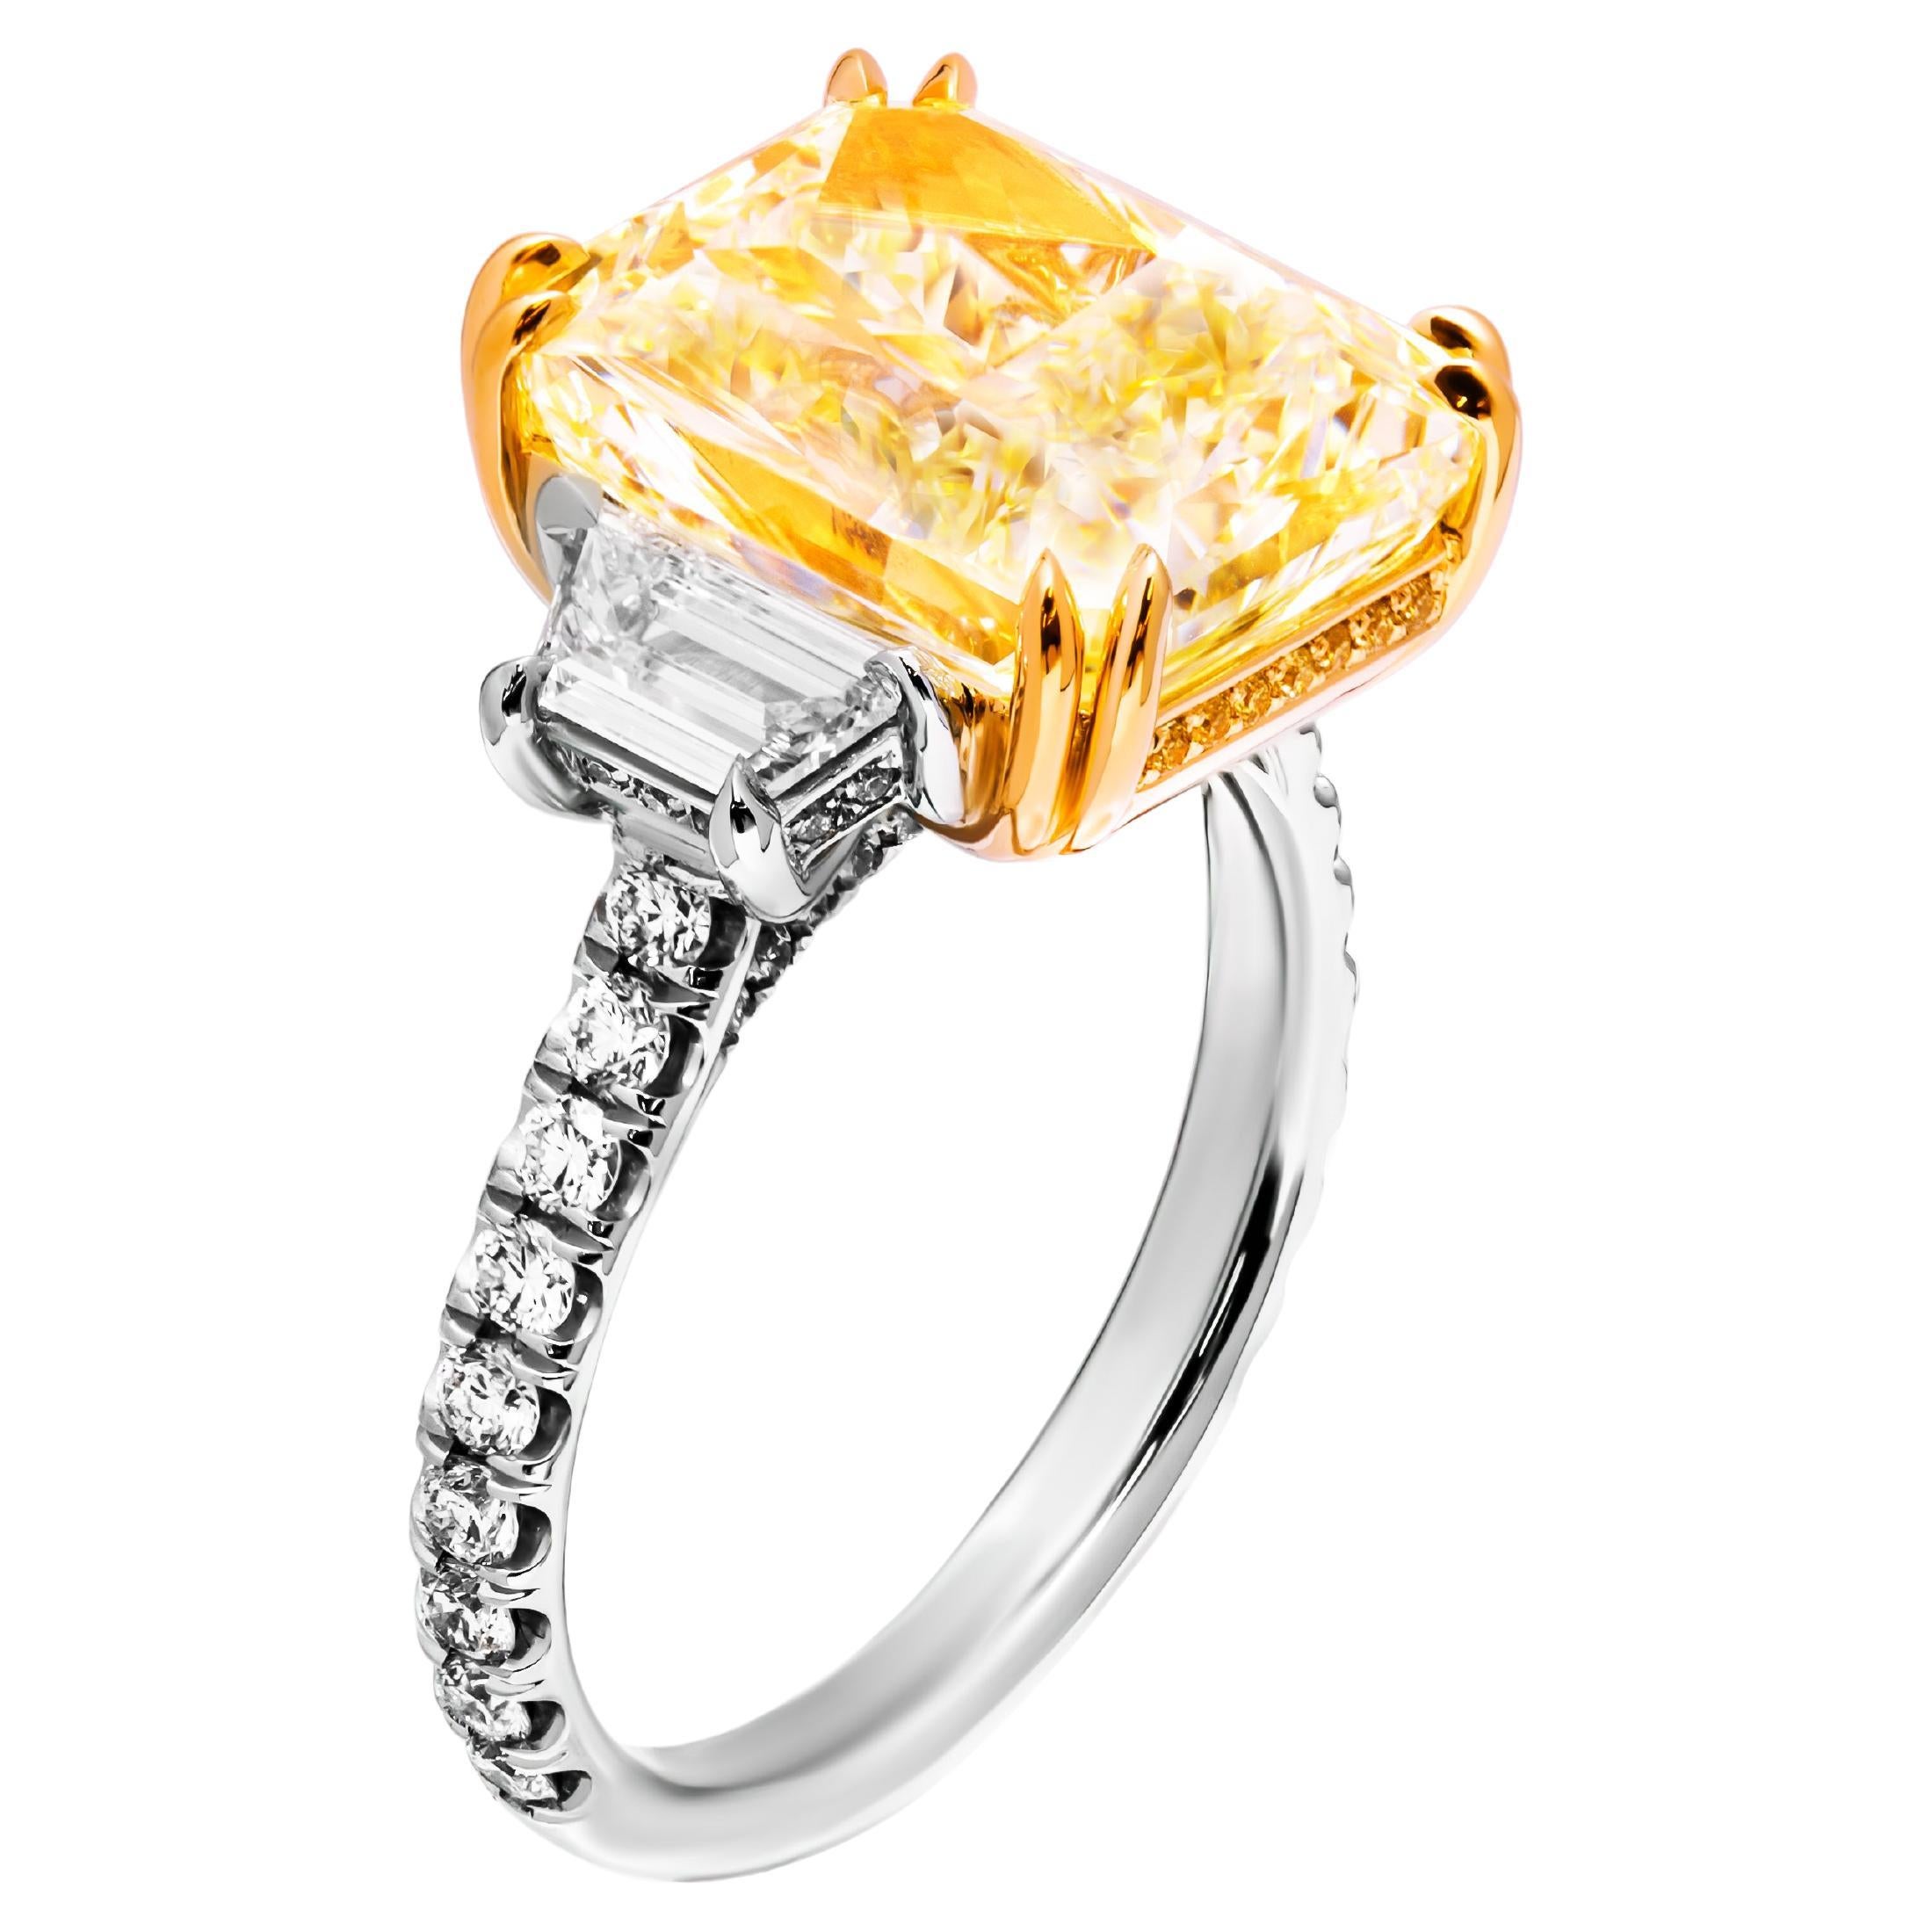 GIA Certified 3 stone ring with 8.02ct Fancy Light Yellow Radiant Cut Diamond For Sale